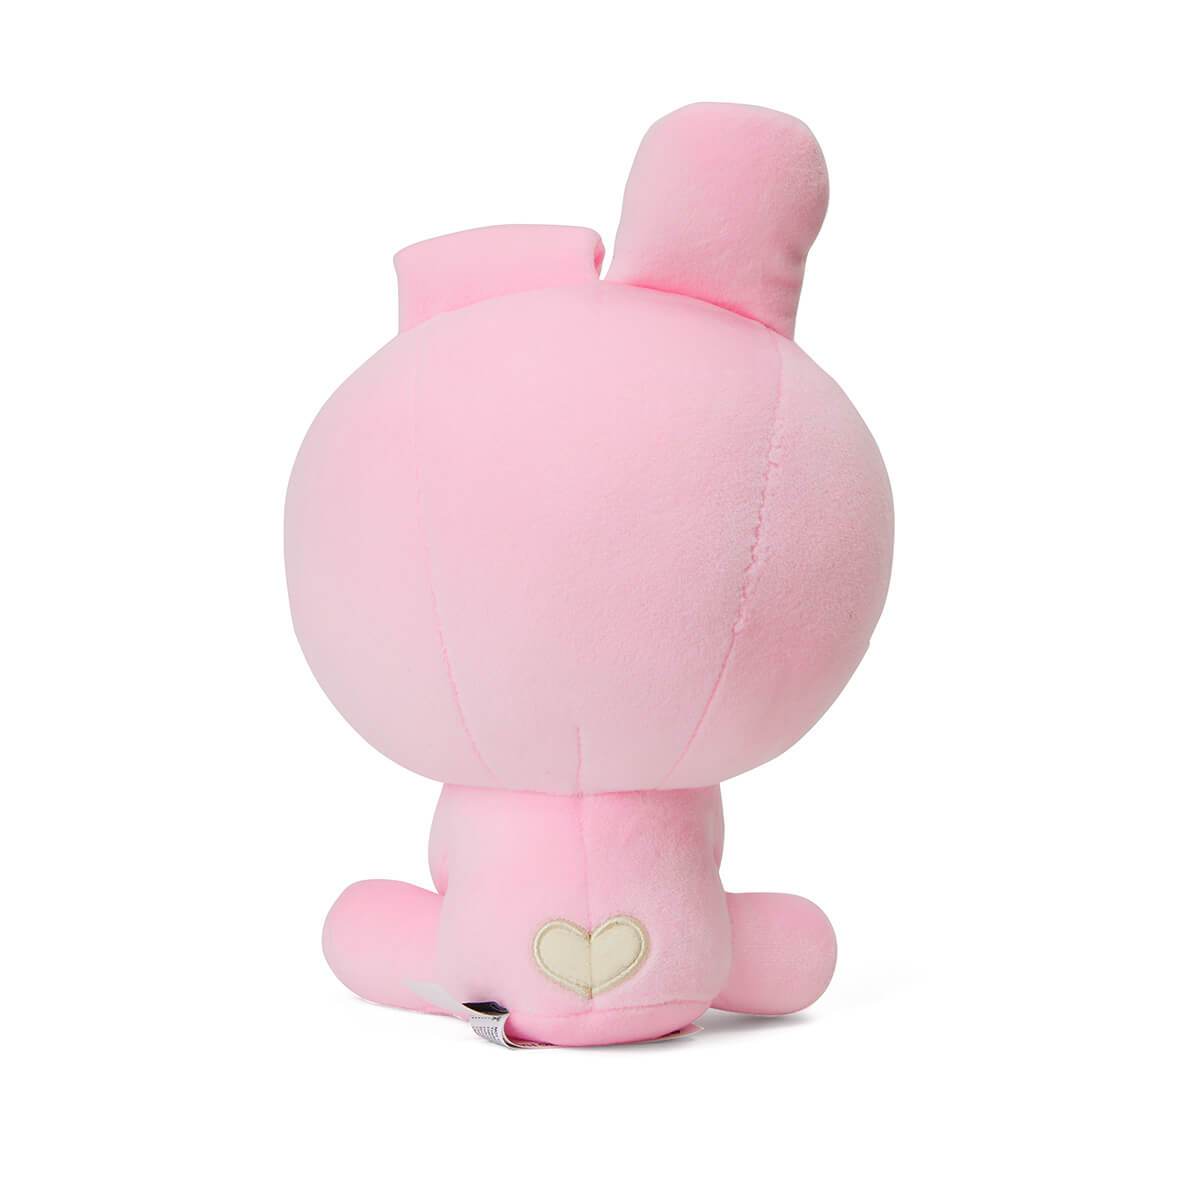 BT21 COOKY Baby Sitting Doll 7.9 inch